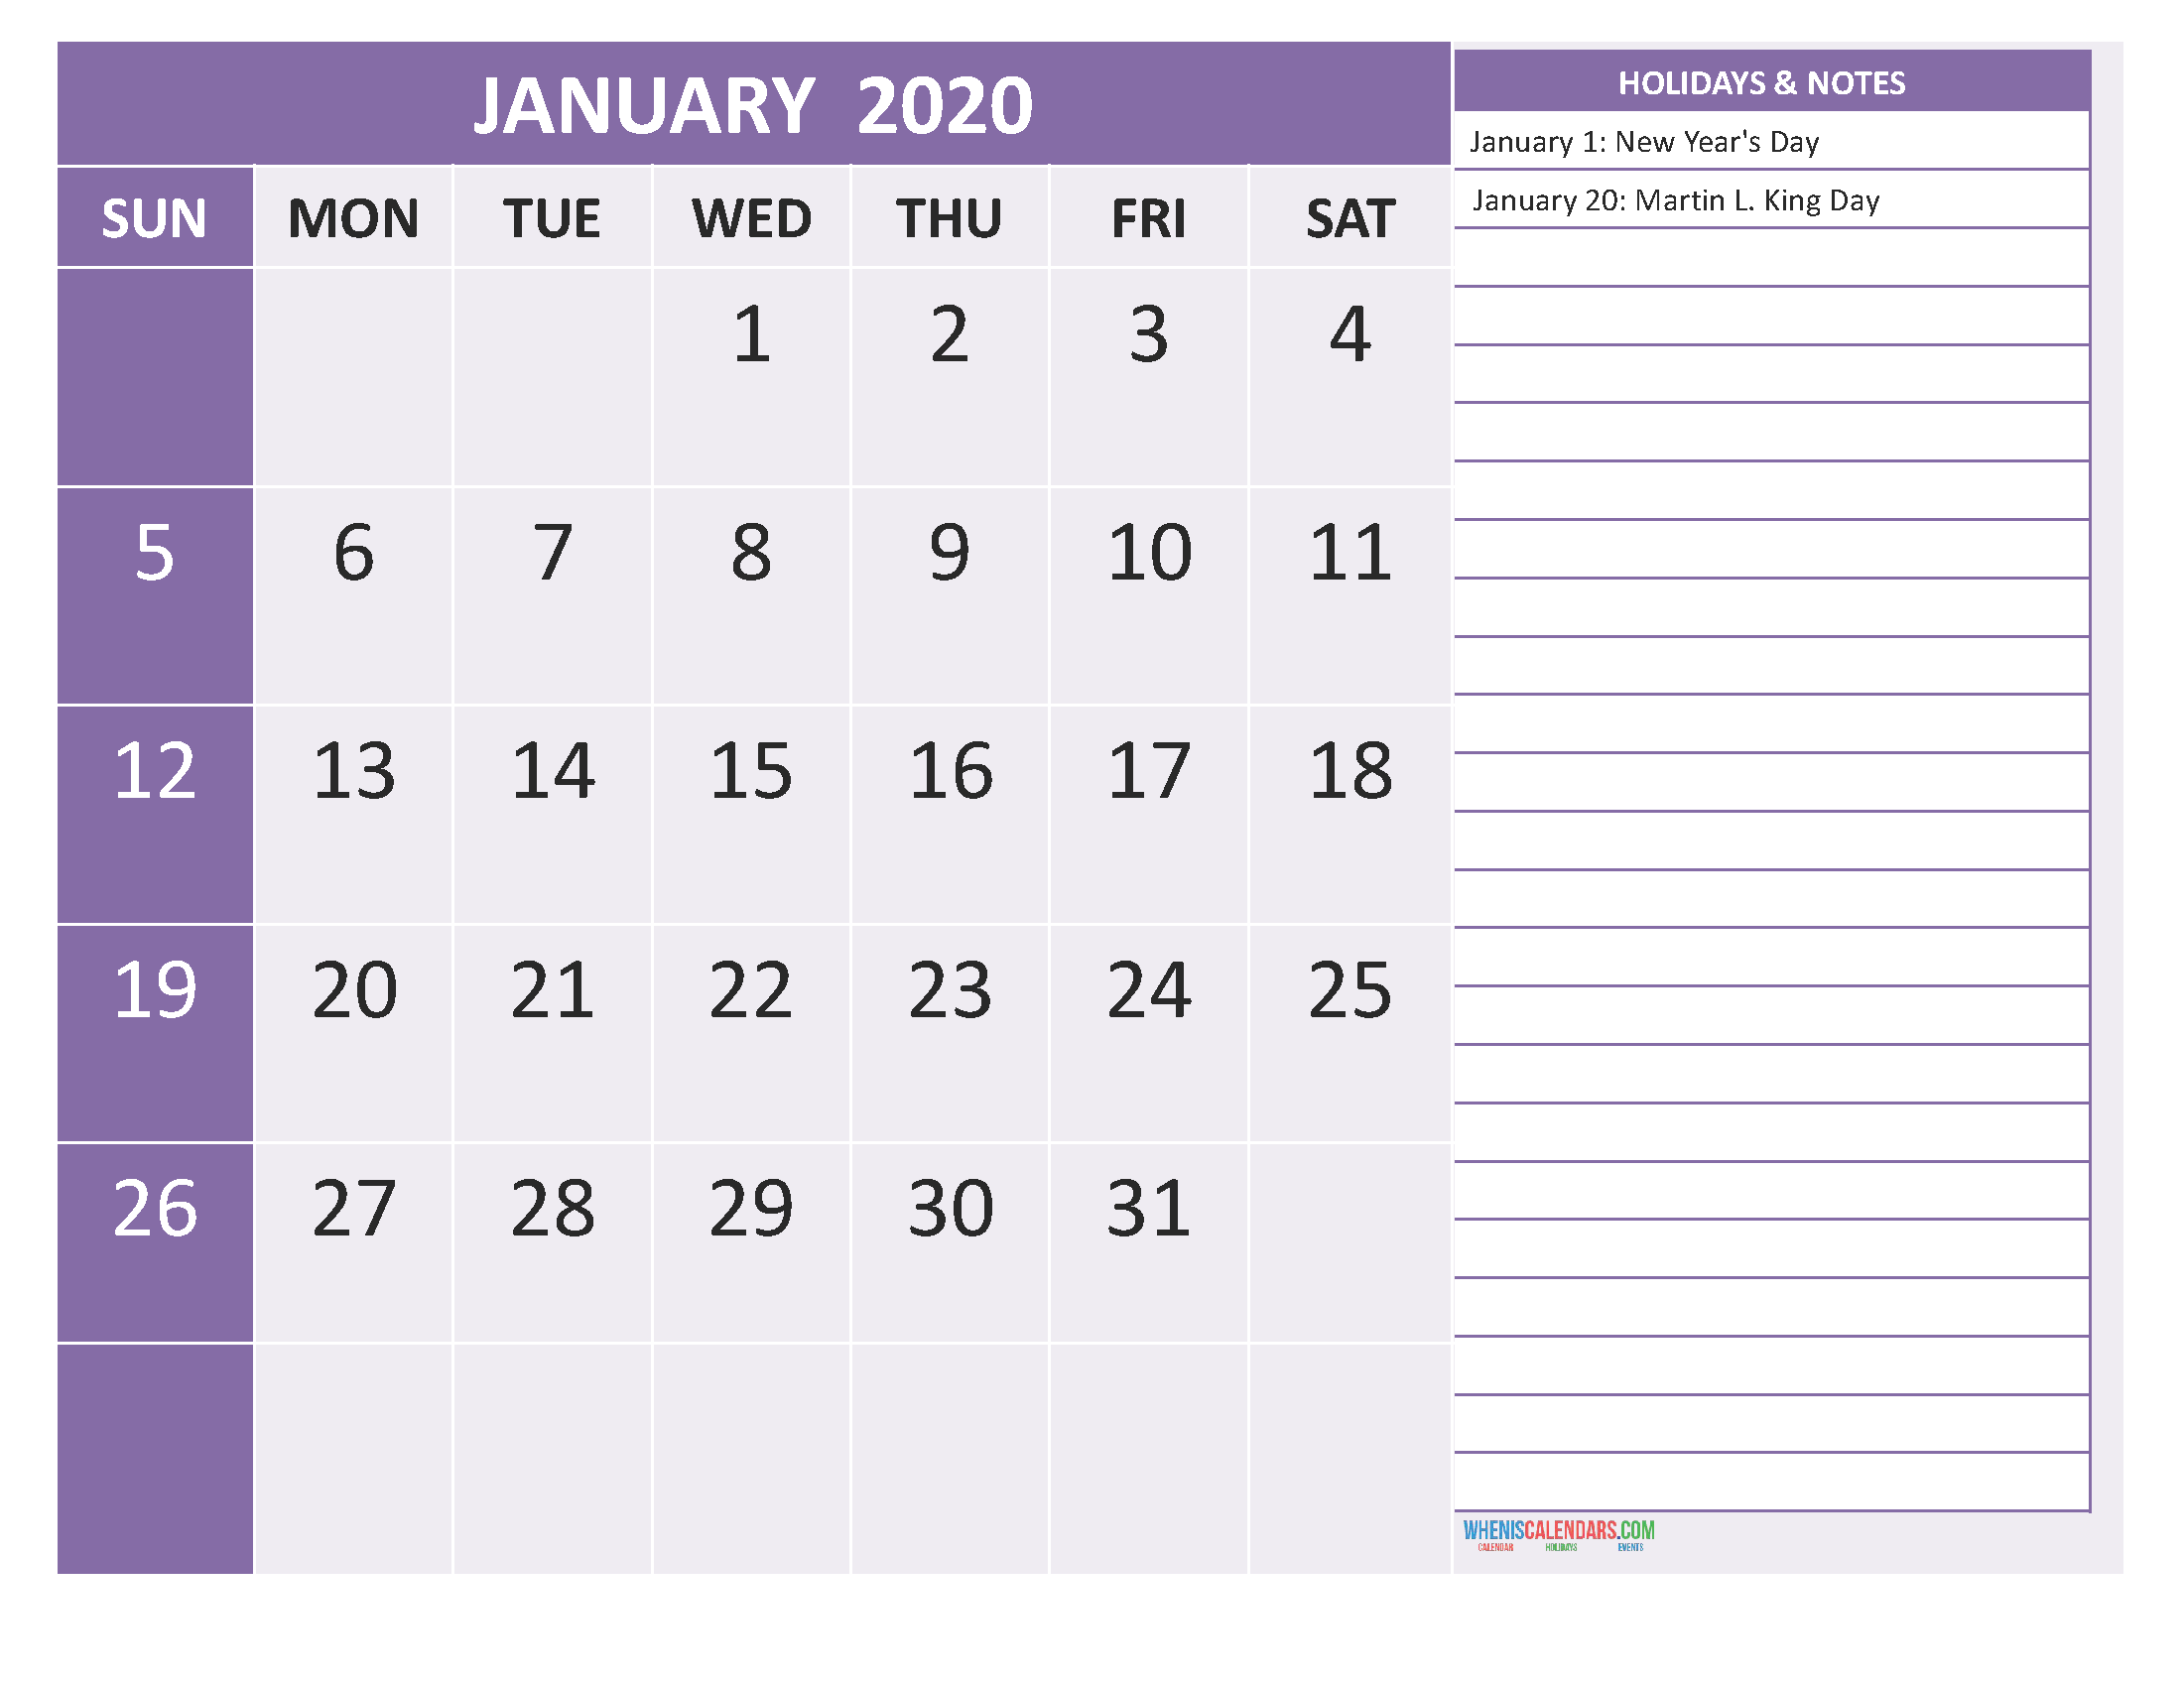 January 2020 Calendar with Holidays Free Printable by Word